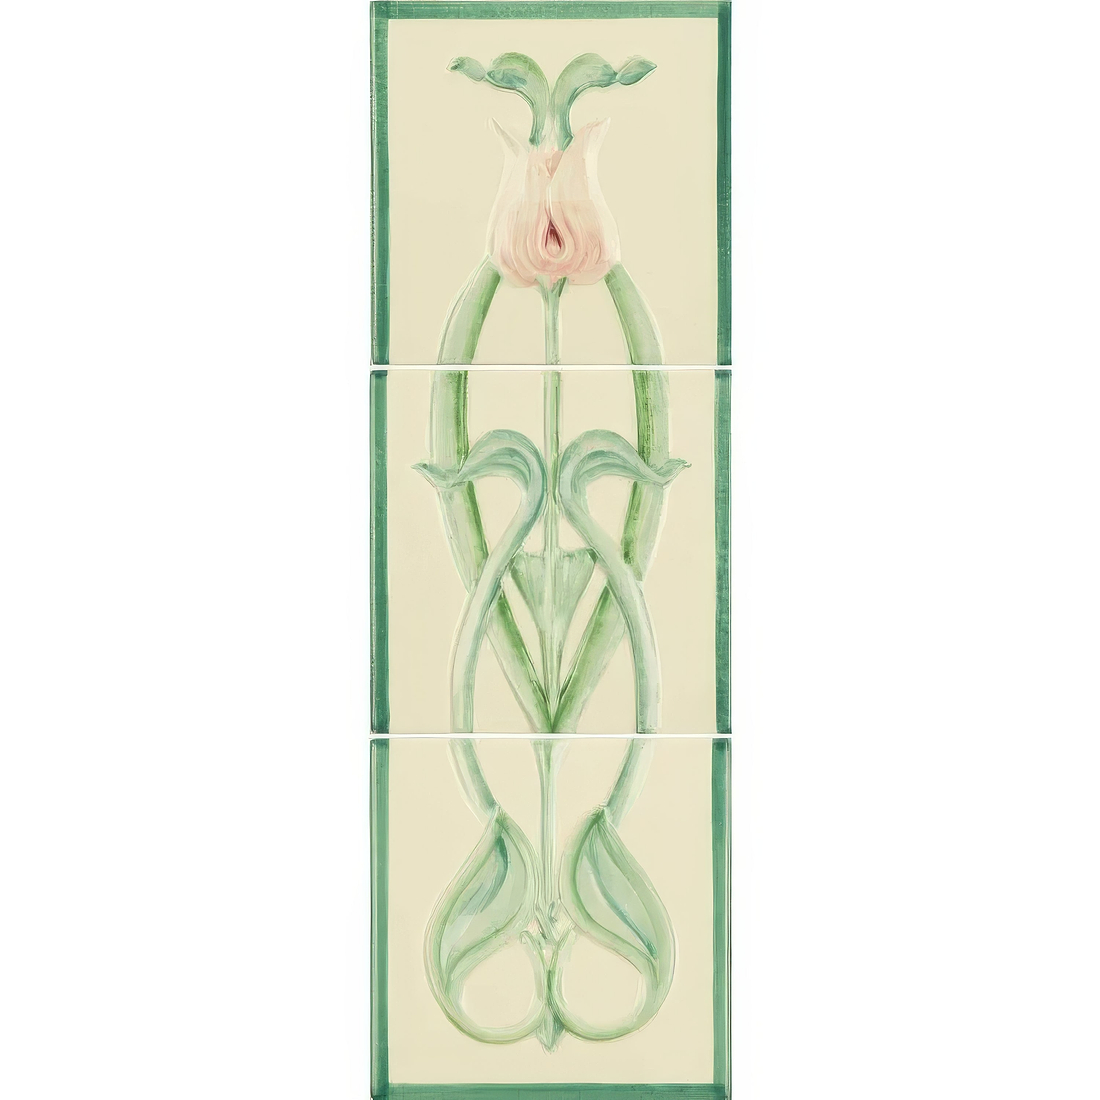 Angelina Pink Tulip 3-Tile Set on County White - Hyperion Tiles